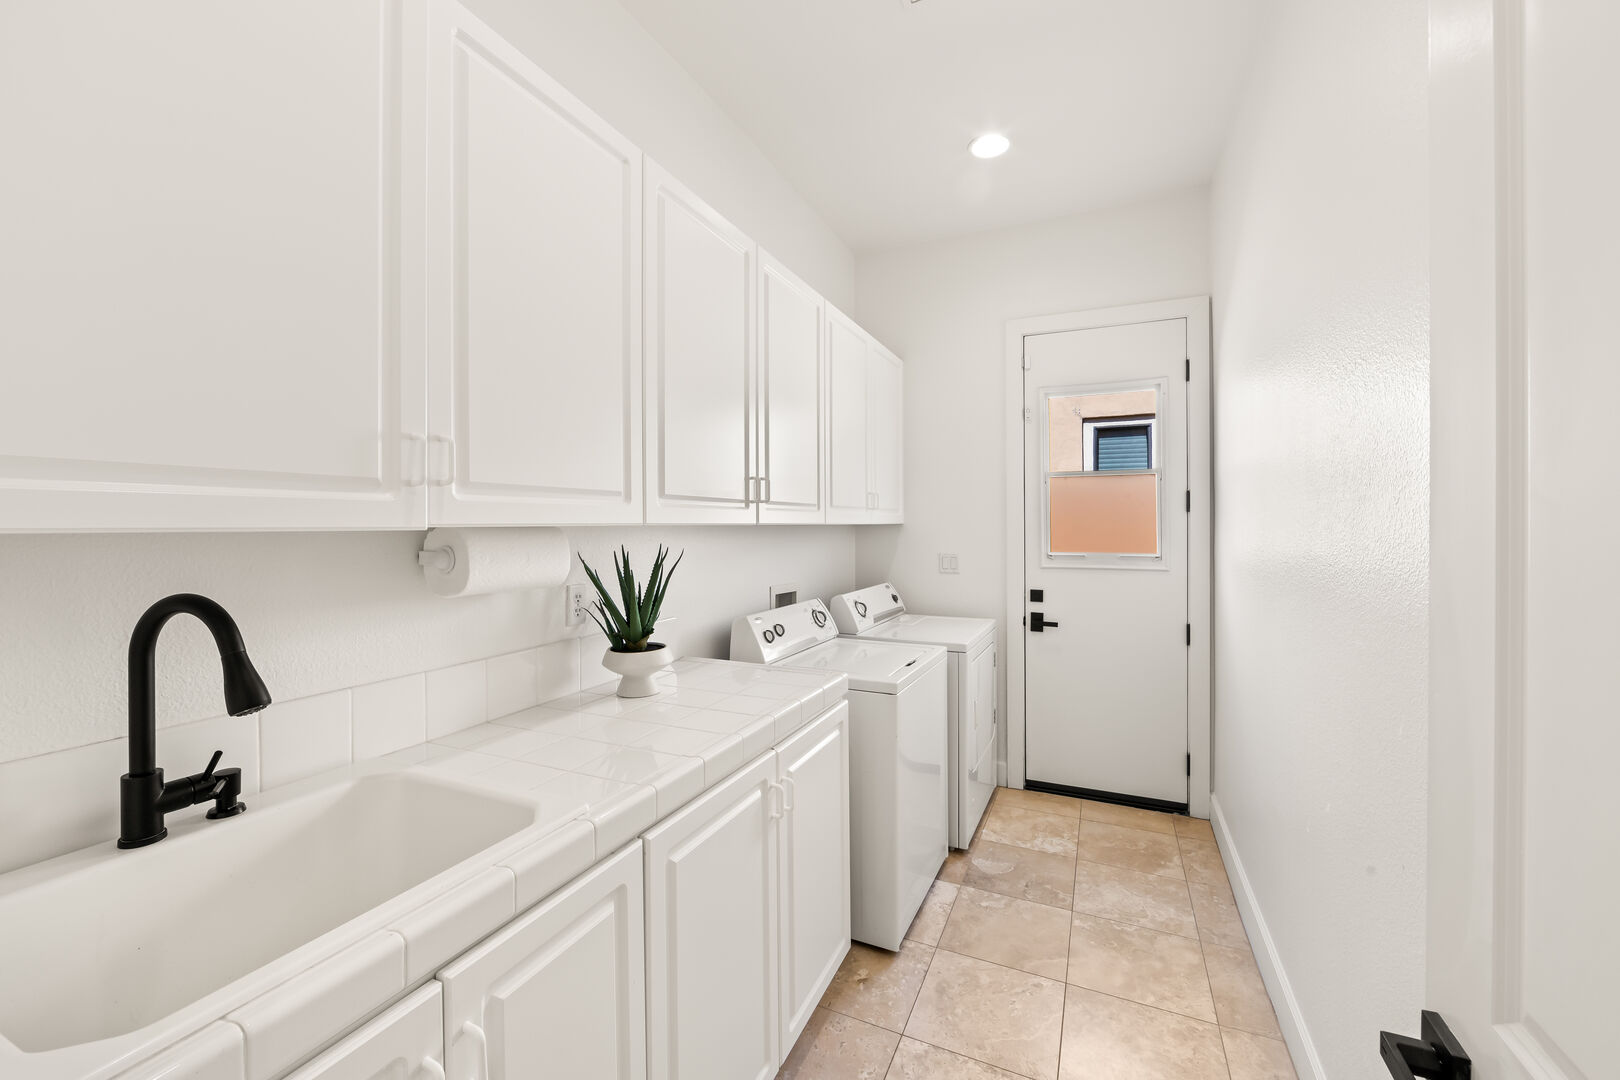 In the fully equipped laundry room, you'll find a washer, dryer, iron, ironing board, and laundry pods for added convenience.